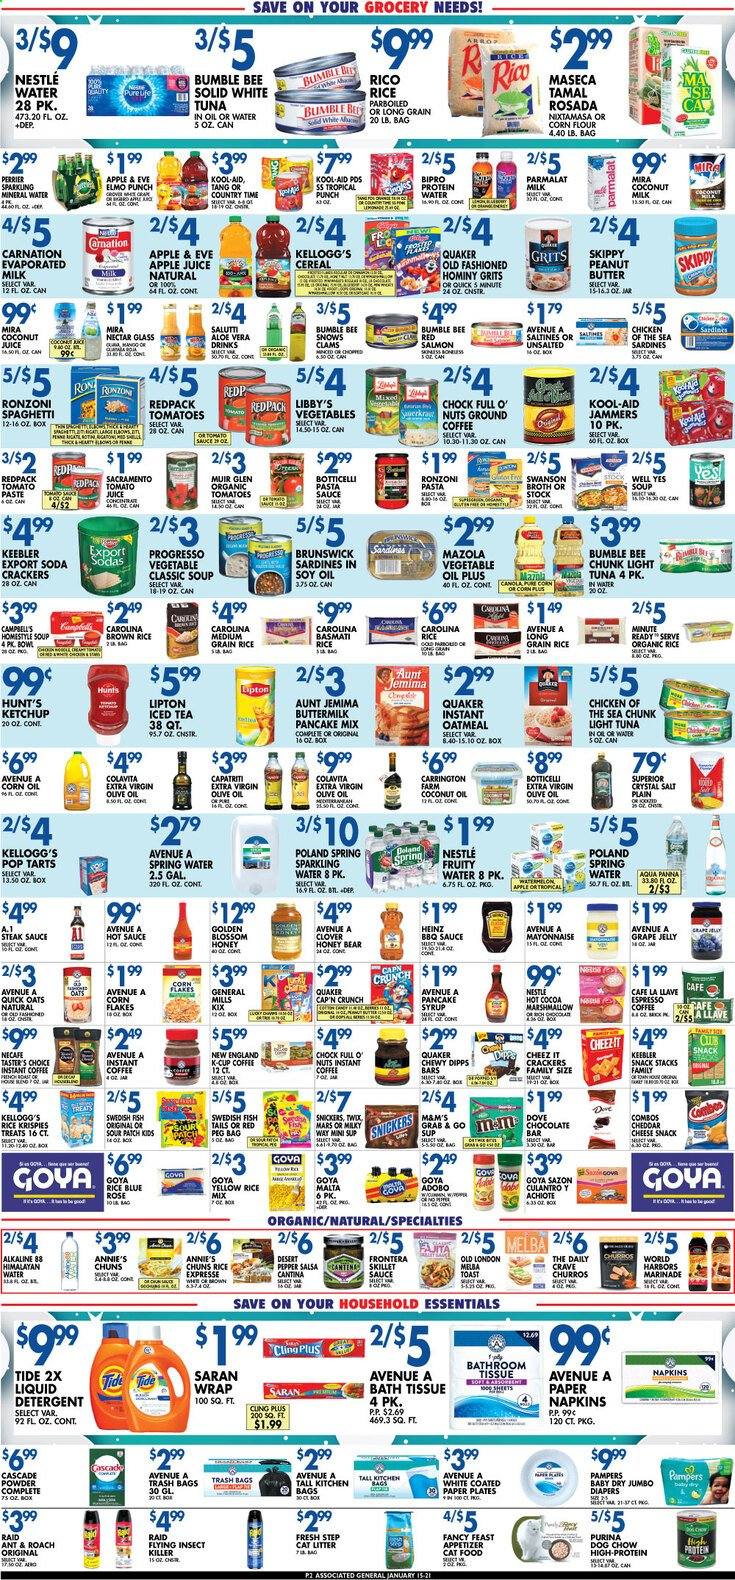 thumbnail - Associated Supermarkets Flyer - 01/15/2021 - 01/21/2021 - Sales products - toast bread, clams, salmon, sardines, tuna, soup, sauce, Quaker, Progresso, Annie's, cheddar, cheese, jelly, Clover, Parmalat, evaporated milk, Blossom, mayonnaise, salsa, marshmallows, Nestlé, chocolate, Snickers, Mars, M&M's, crackers, Kellogg's, Pop-Tarts, Keebler, snack, saltines, flour, oatmeal, oats, grits, corn flour, salt, broth, coconut milk, tomato paste, Heinz, light tuna, Chicken of the Sea, Goya, cereals, corn flakes, Rice Krispies, churros, Cap'n Crunch, Quick Oats, basmati rice, brown rice, spaghetti, whole grain rice, penne, long grain rice, marinade, adobo sauce, BBQ sauce, steak sauce, tomato sauce, hot sauce, ketchup, pasta sauce, coconut oil, corn oil, extra virgin olive oil, vegetable oil, olive oil, grape jelly, honey, peanut butter, pancake syrup, syrup, apple juice, tomato juice, soda, juice, Lipton, Perrier, Country Time, mineral water, spring water, sparkling water, hot cocoa, instant coffee, ground coffee, coffee capsules, K-Cups, punch, Ron Pelicano, Sol, steak, Pampers, napkins, Dove, bath tissue, detergent, Cascade, Tide, liquid detergent, trash bags, insect killer, Raid, cat litter, bowl, animal food, cat food, Dog Chow, Purina, Fancy Feast, Fresh Step, watermelon. Page 2.